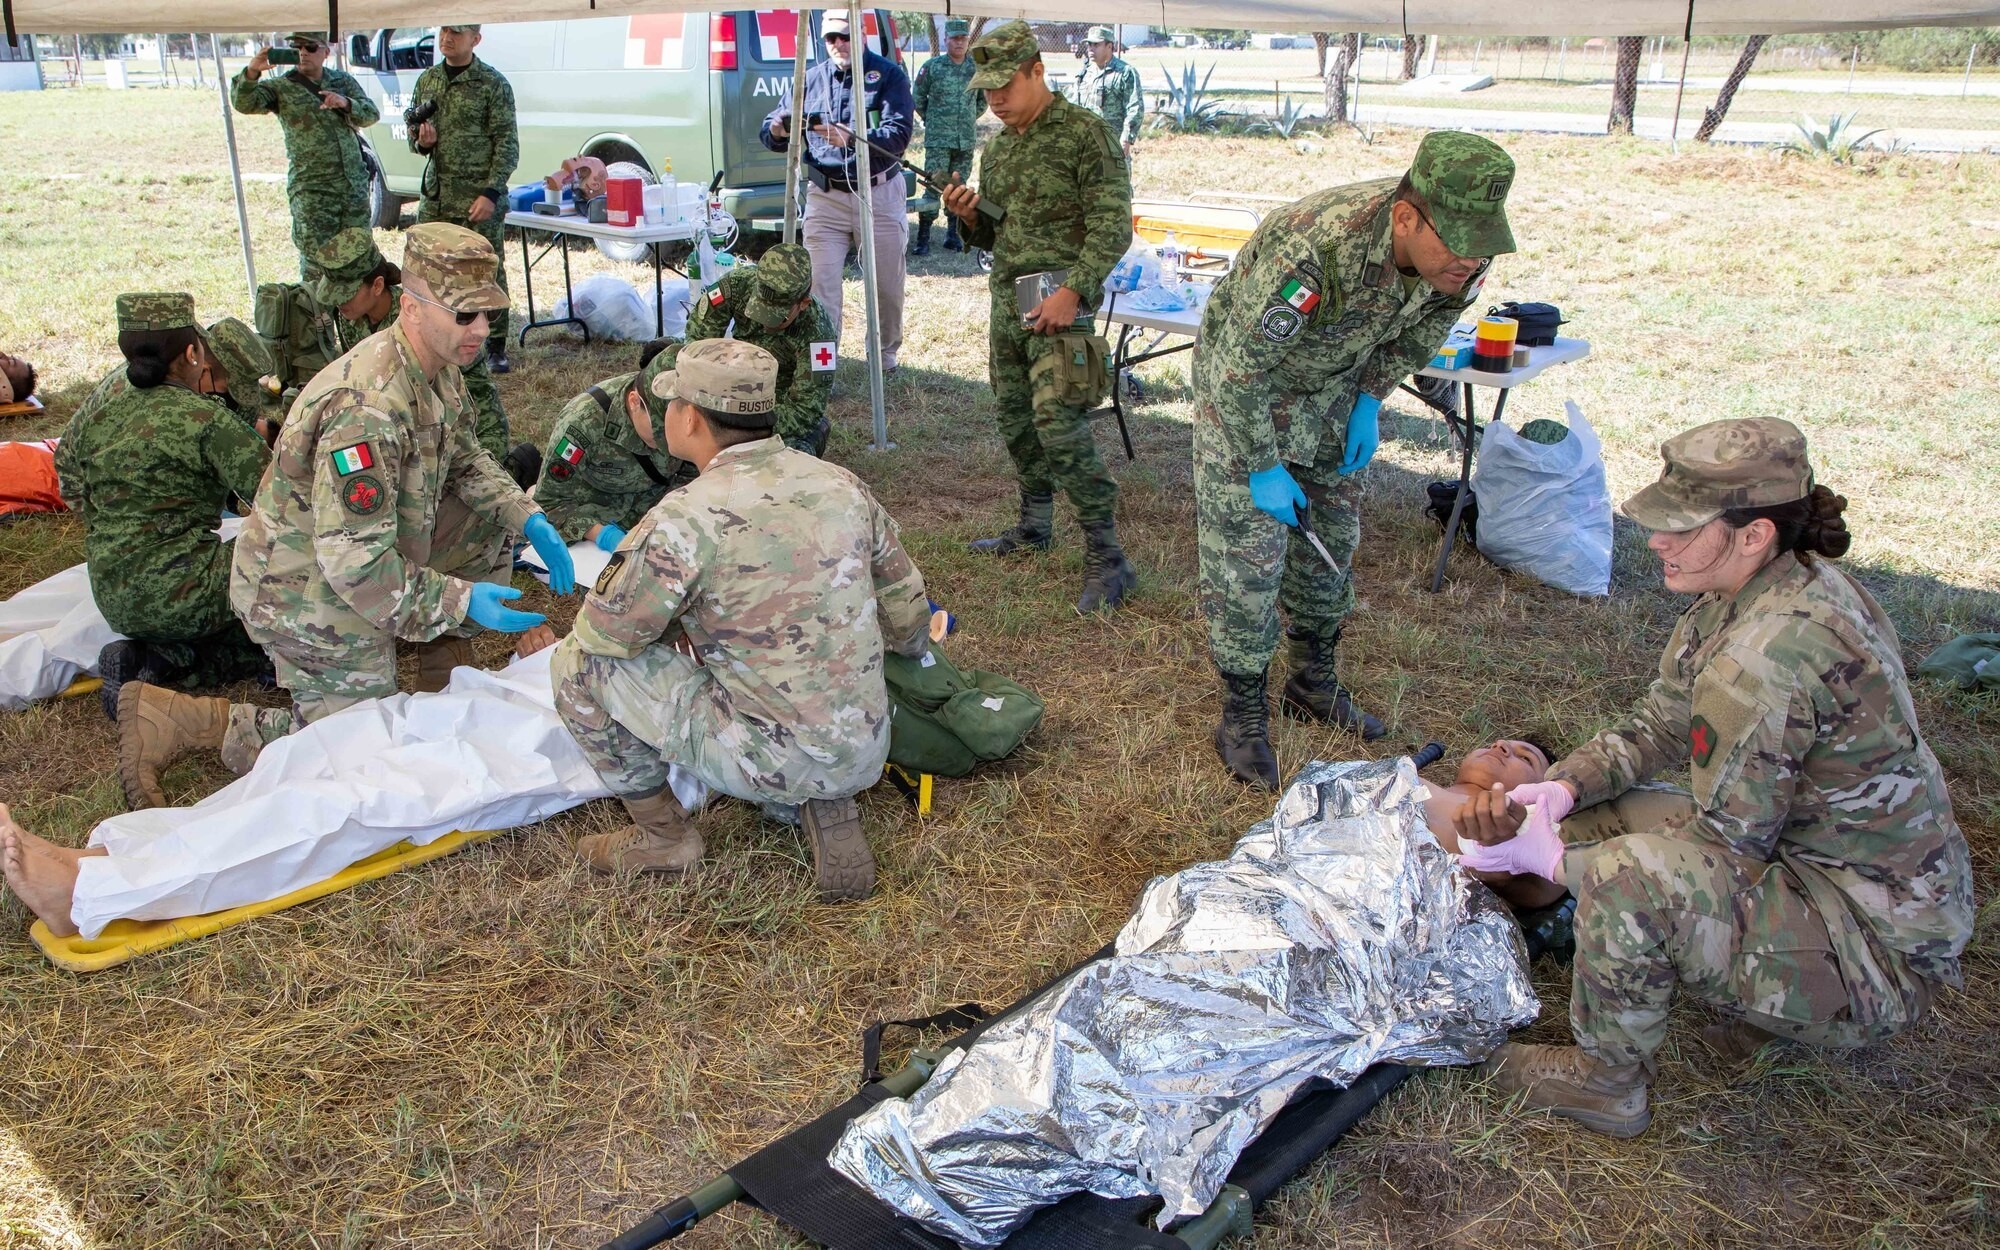 US and Mexico thrive together during exercise Fuerzas Amigas 2022